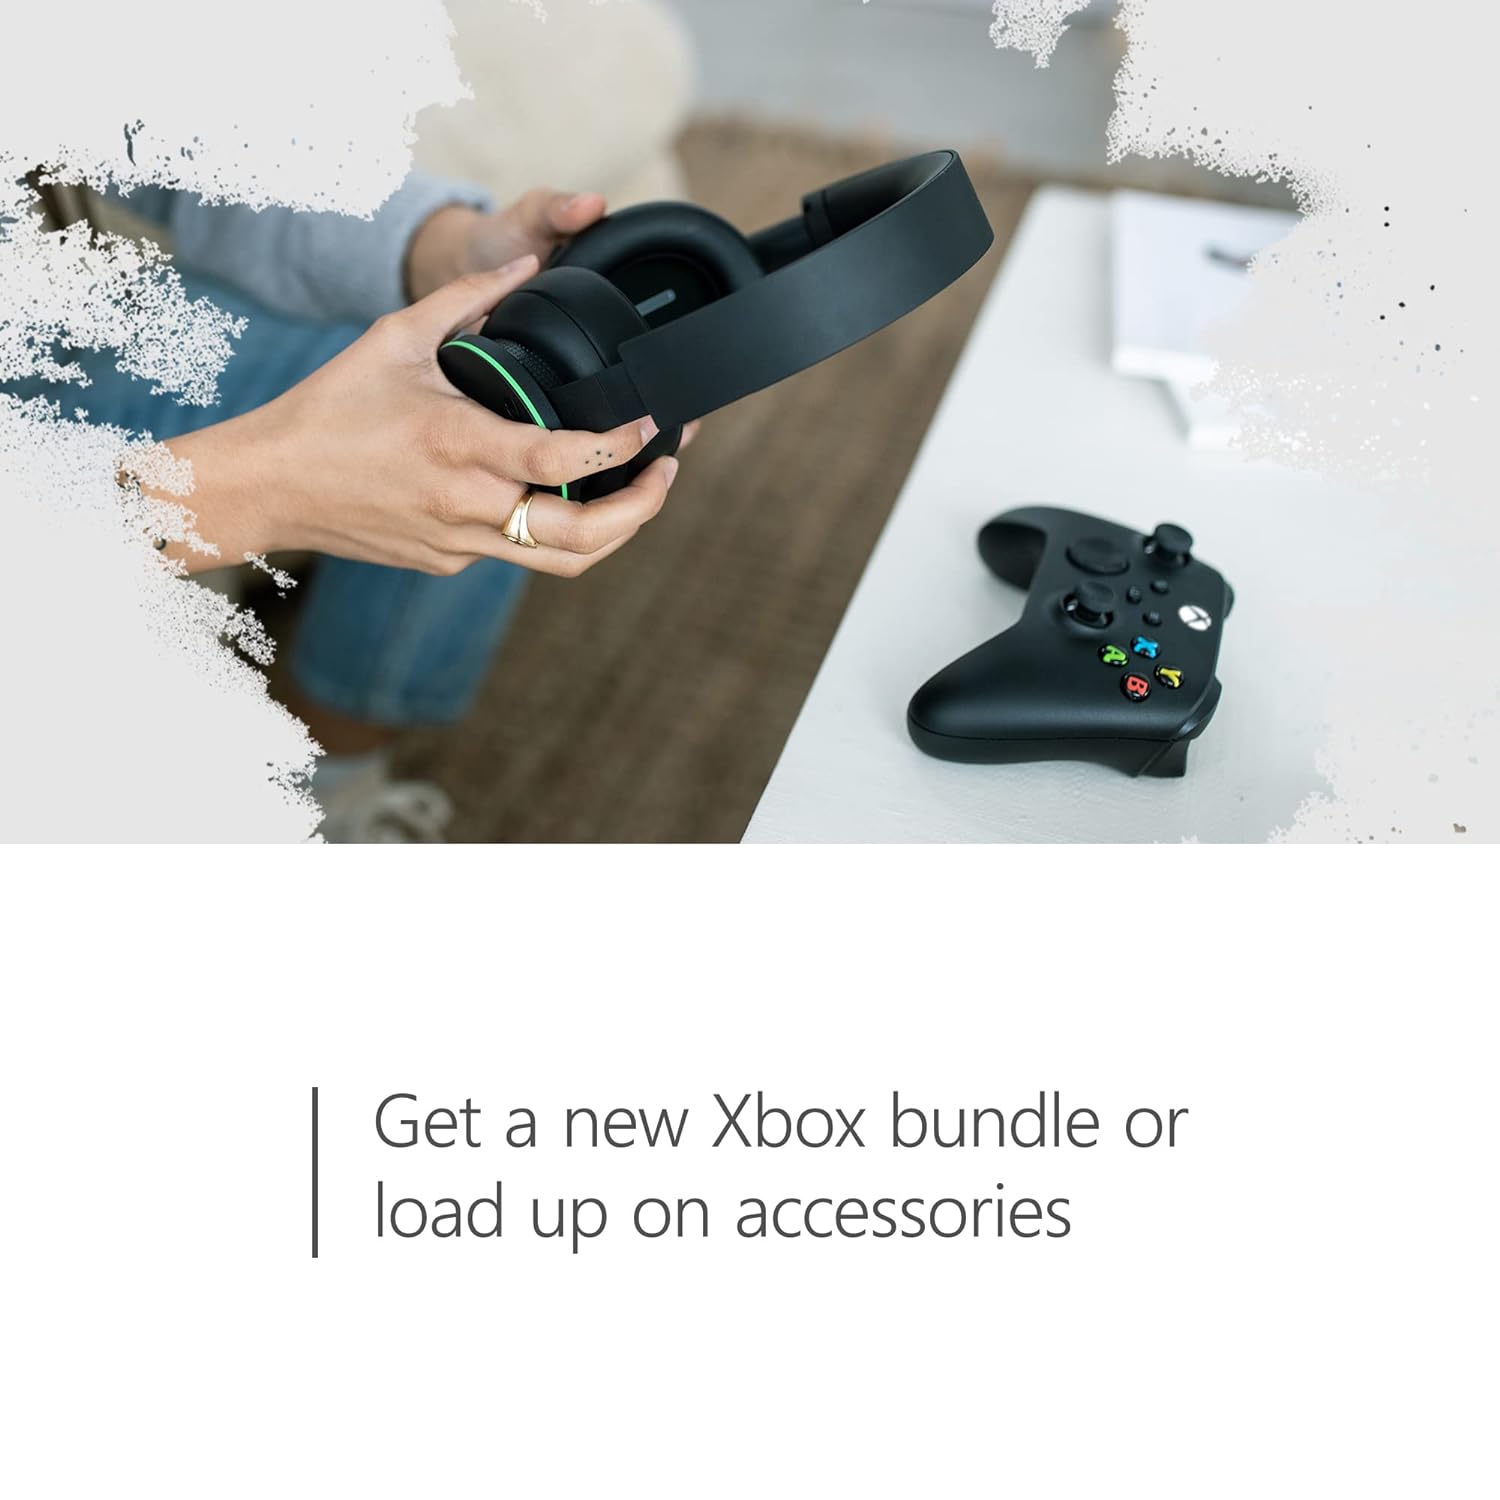 $25 Xbox Digital Gift Card | Get a new Xbox bundle or load up on accessories.